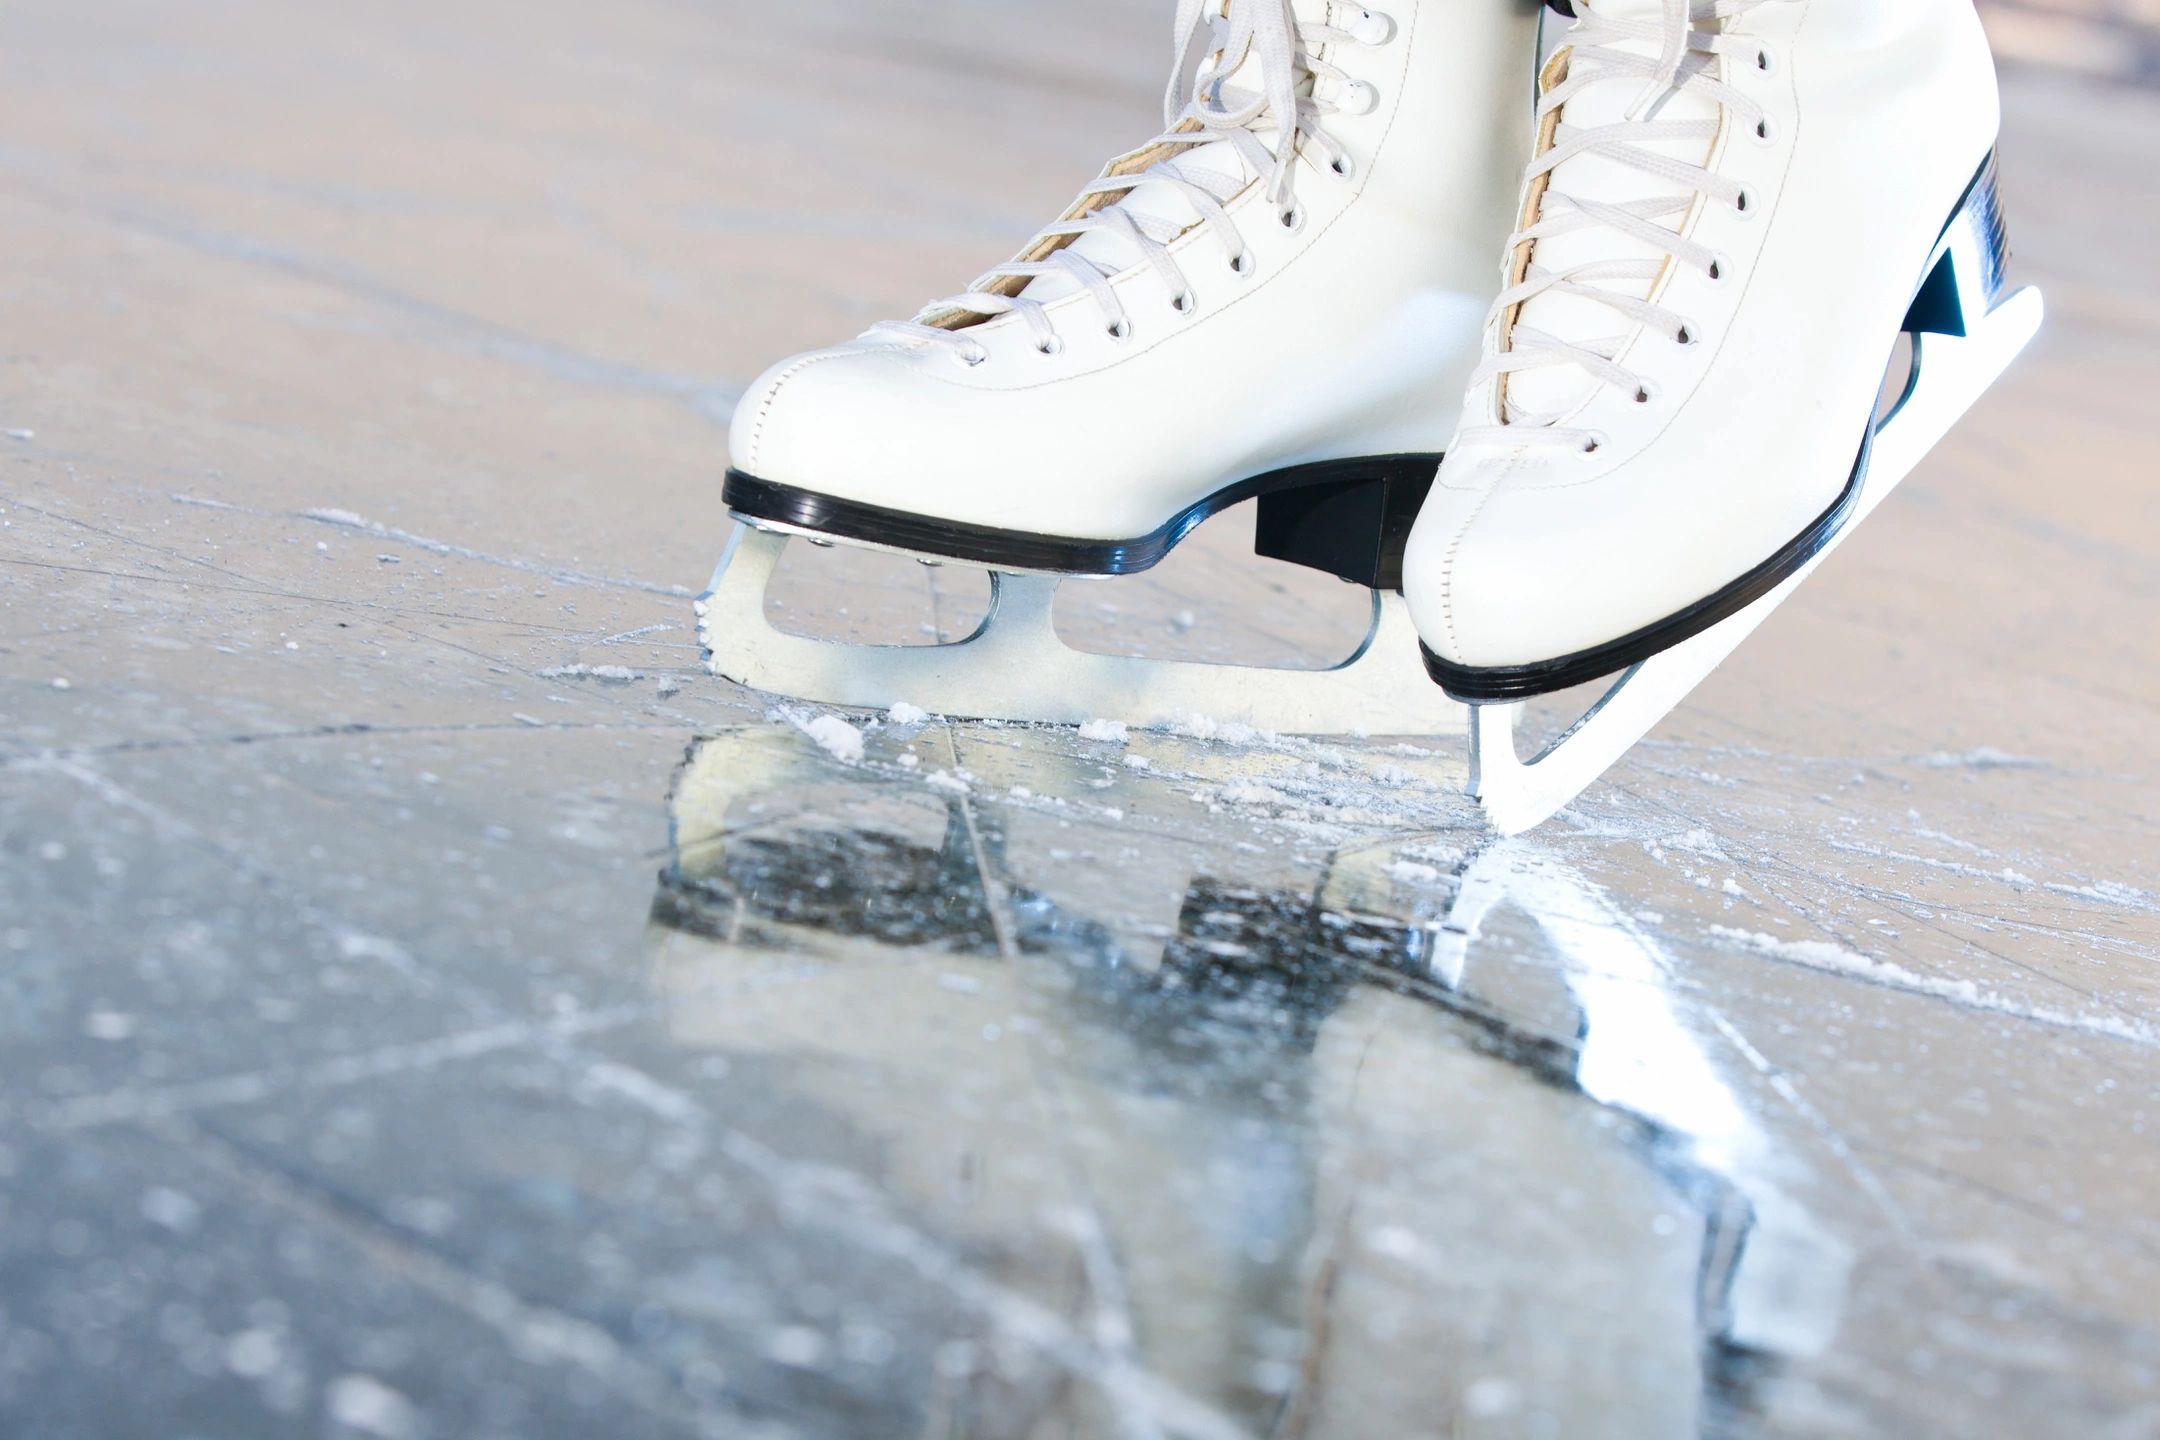 Figure skater at an ice rink